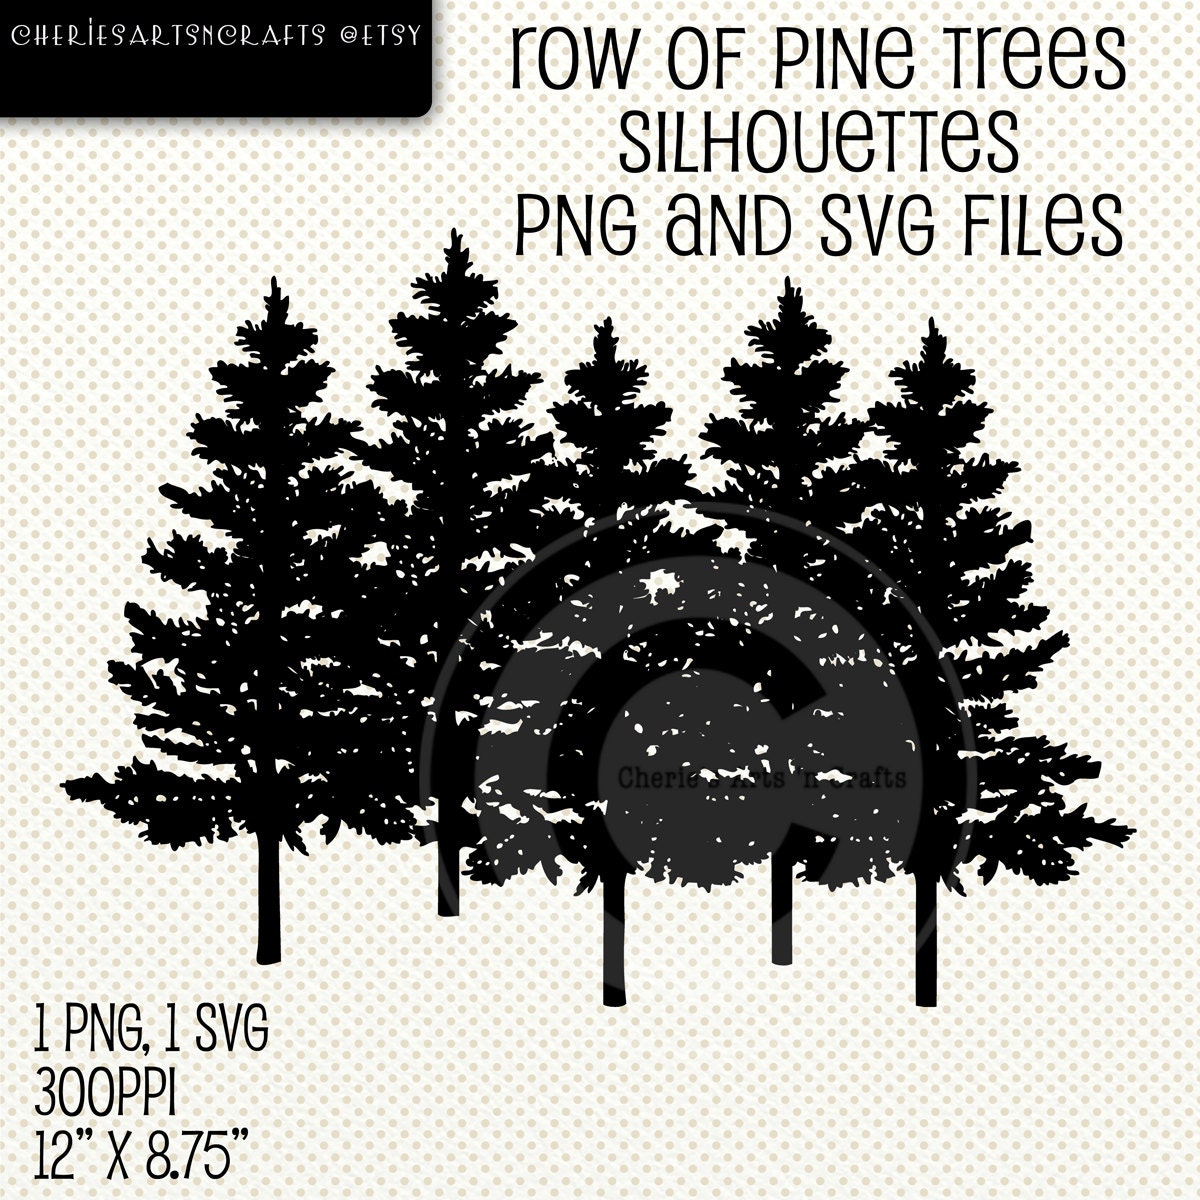 Download Row of Pine Trees Silhouettes PNG and SVG Files Digital